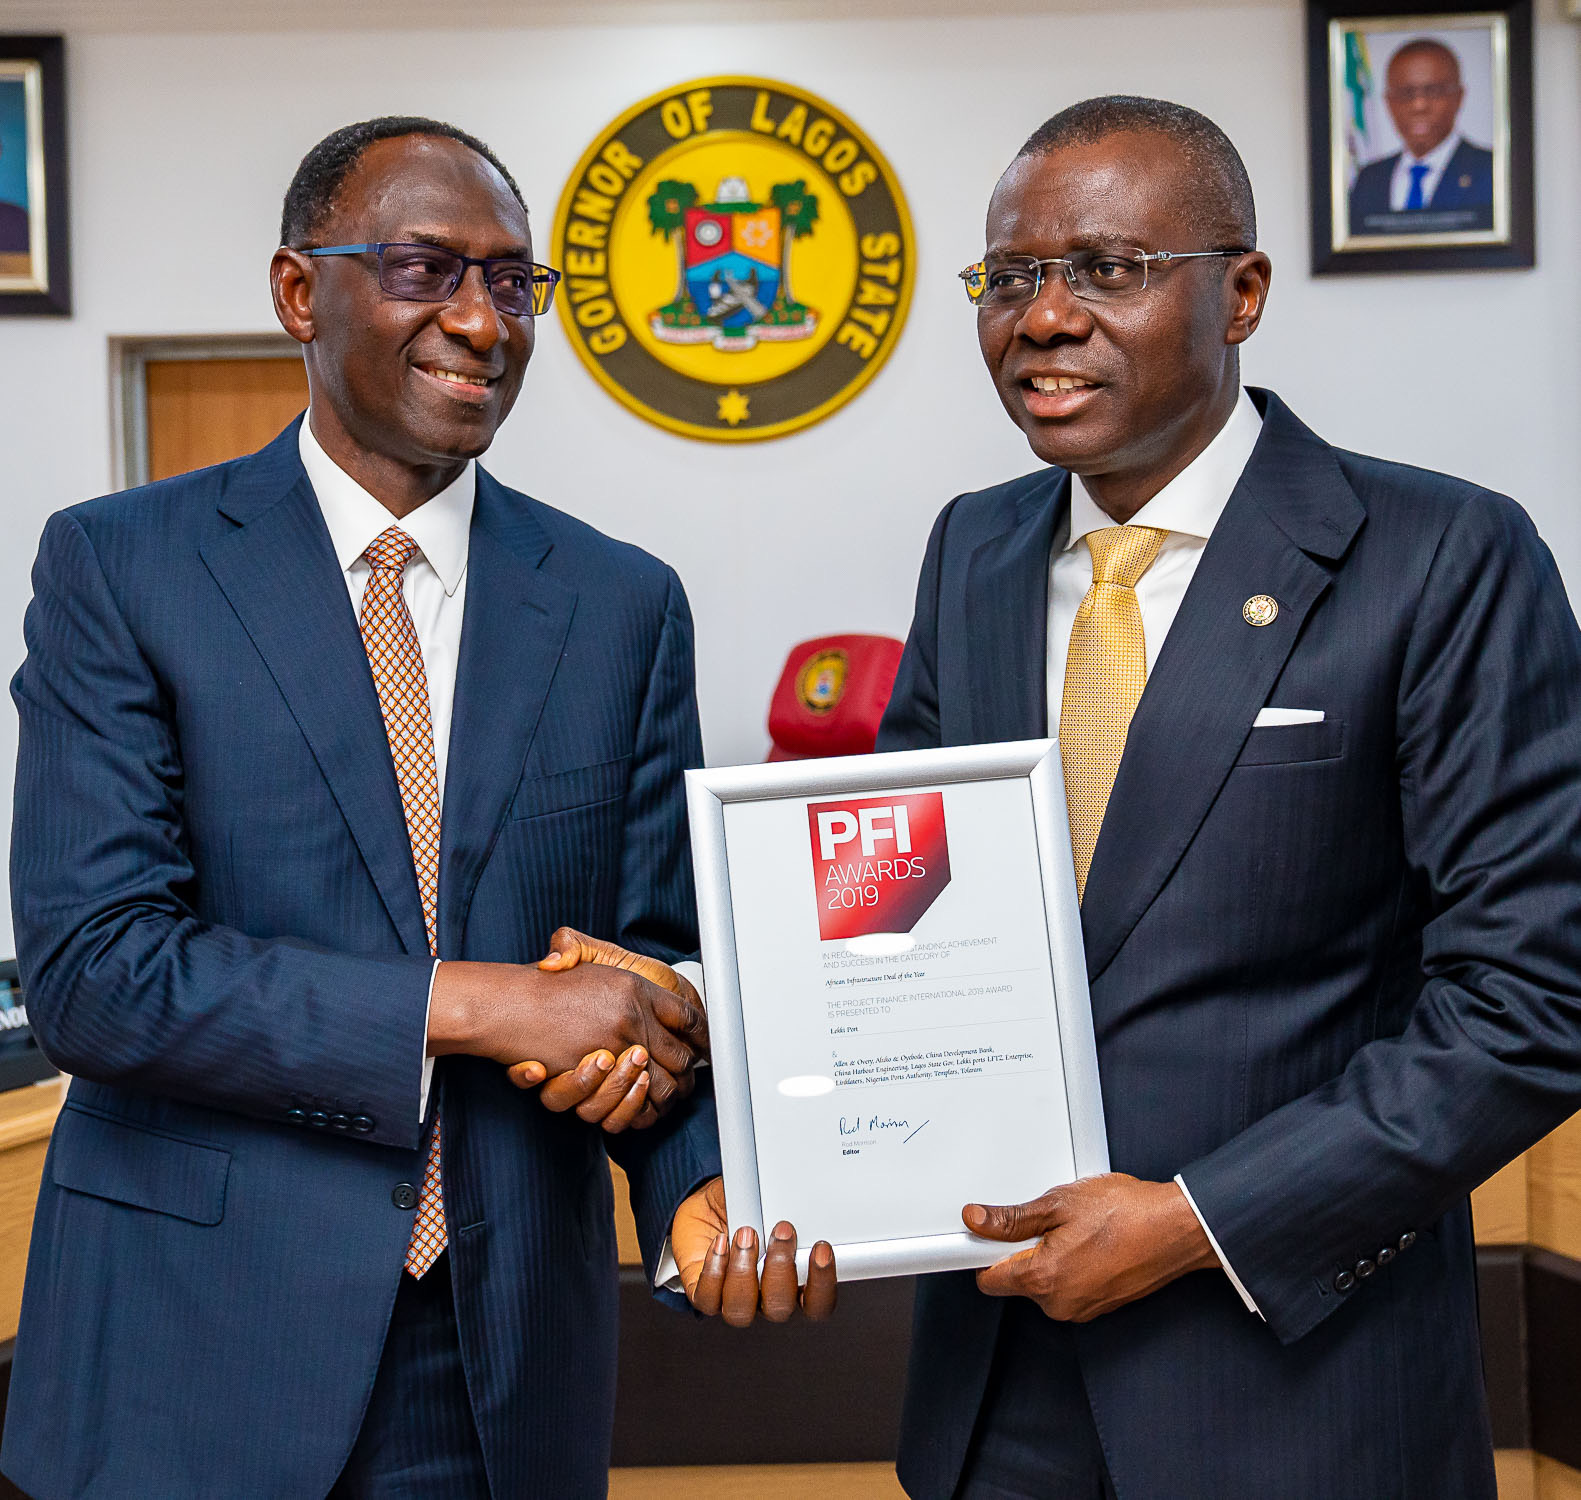 L-R: Chairman, Lekki Port, Mr. Abiodun Dabiri, presents the Project Finance International (PFI) Award of African Infrastructure Deal of the Year, won by Lekki Port to Lagos State Governor, Mr. Babajide Sanwo-Olu, at Lagos House, Alausa, Ikeja, on Tuesday, February 18, 2020.